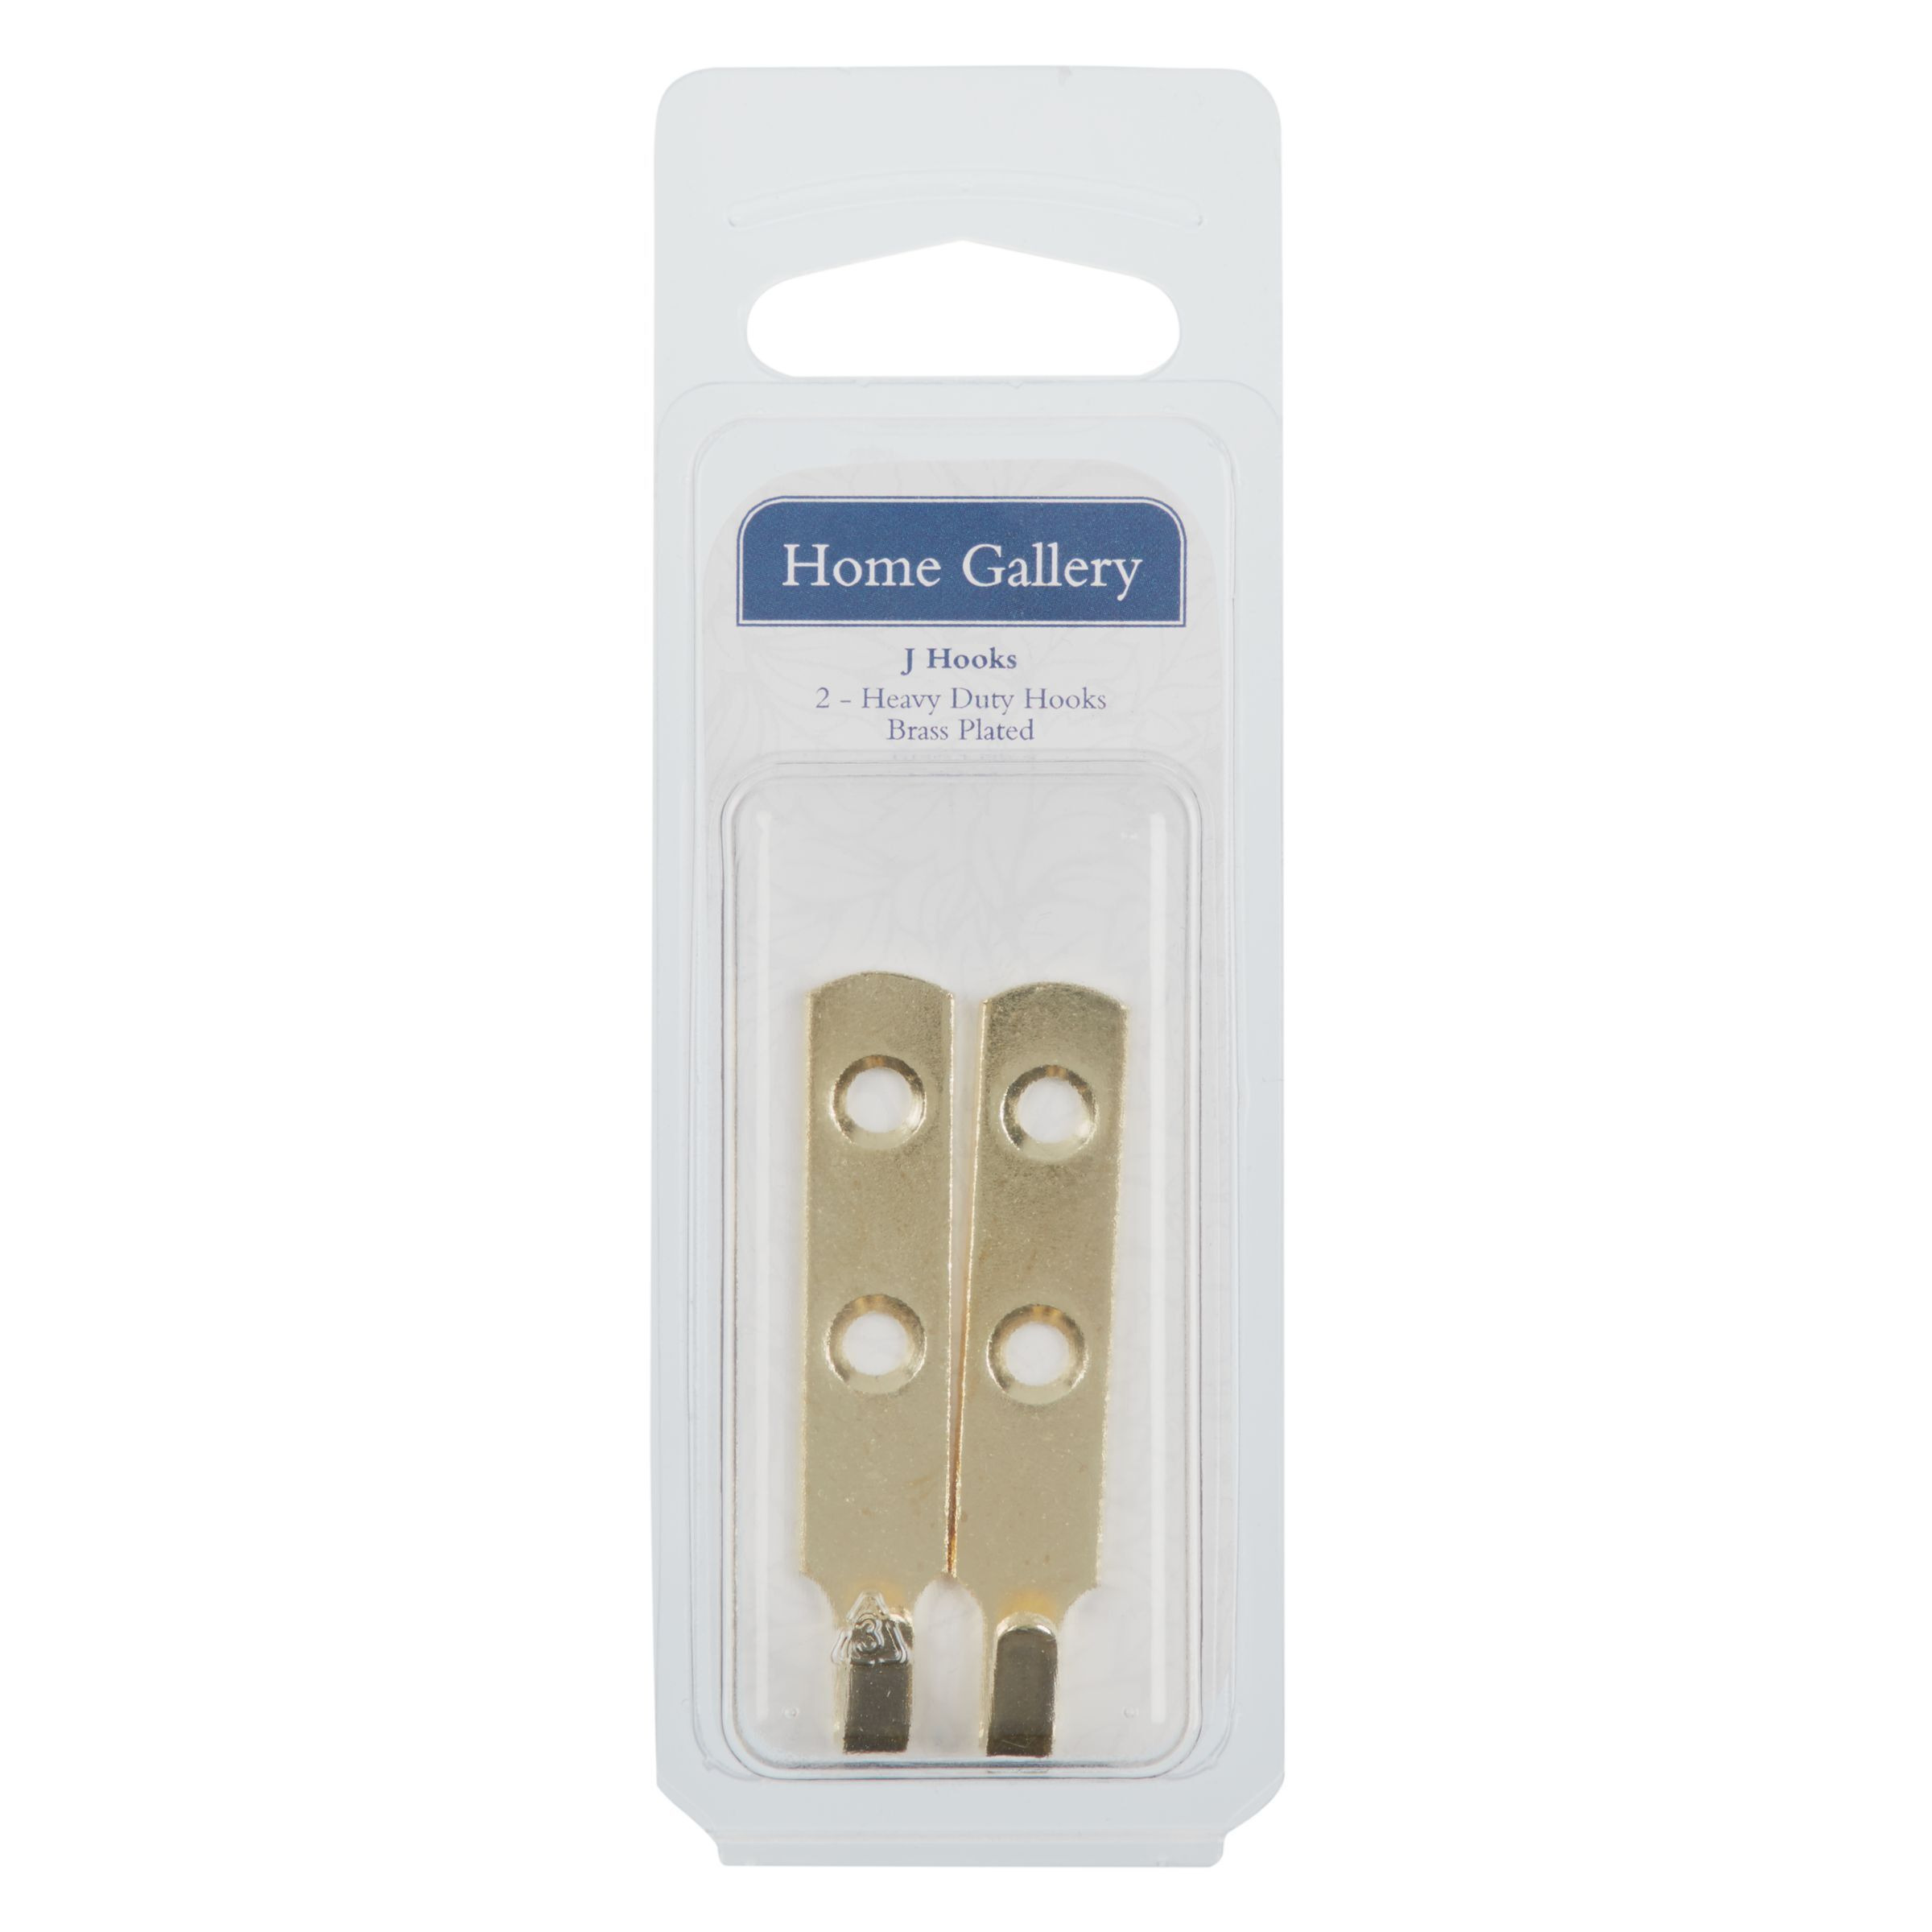 Home Gallery Brass Plated J Hooks, Pack of 2 - image 1